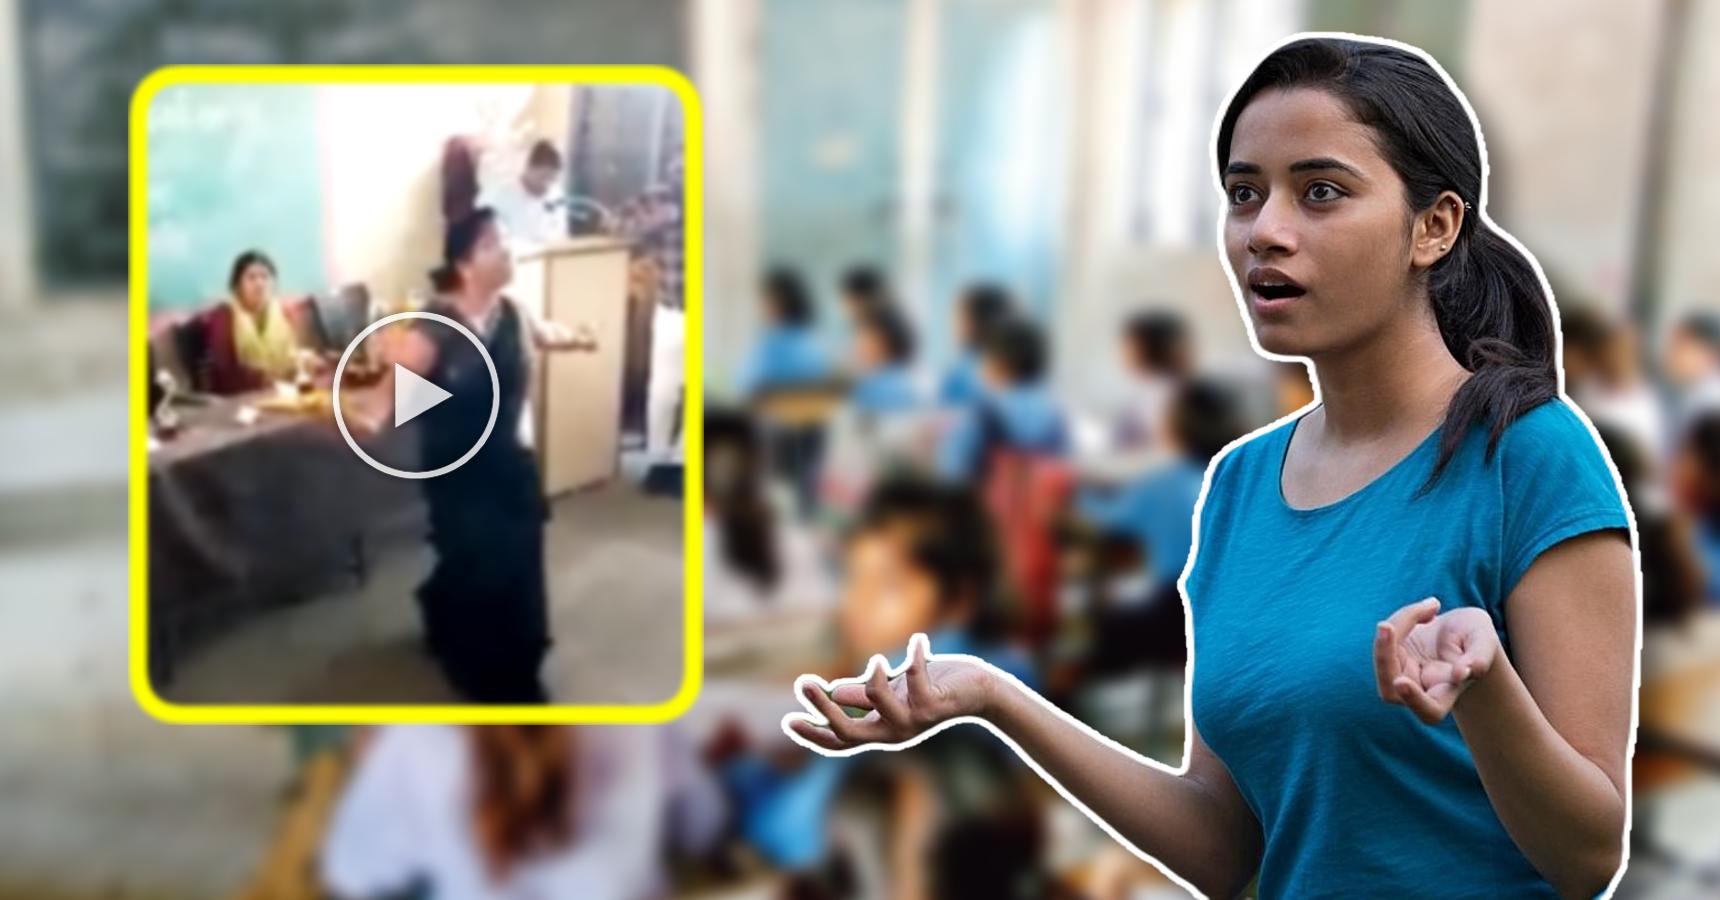 UP school teachers force students to like their Instagram reels in class